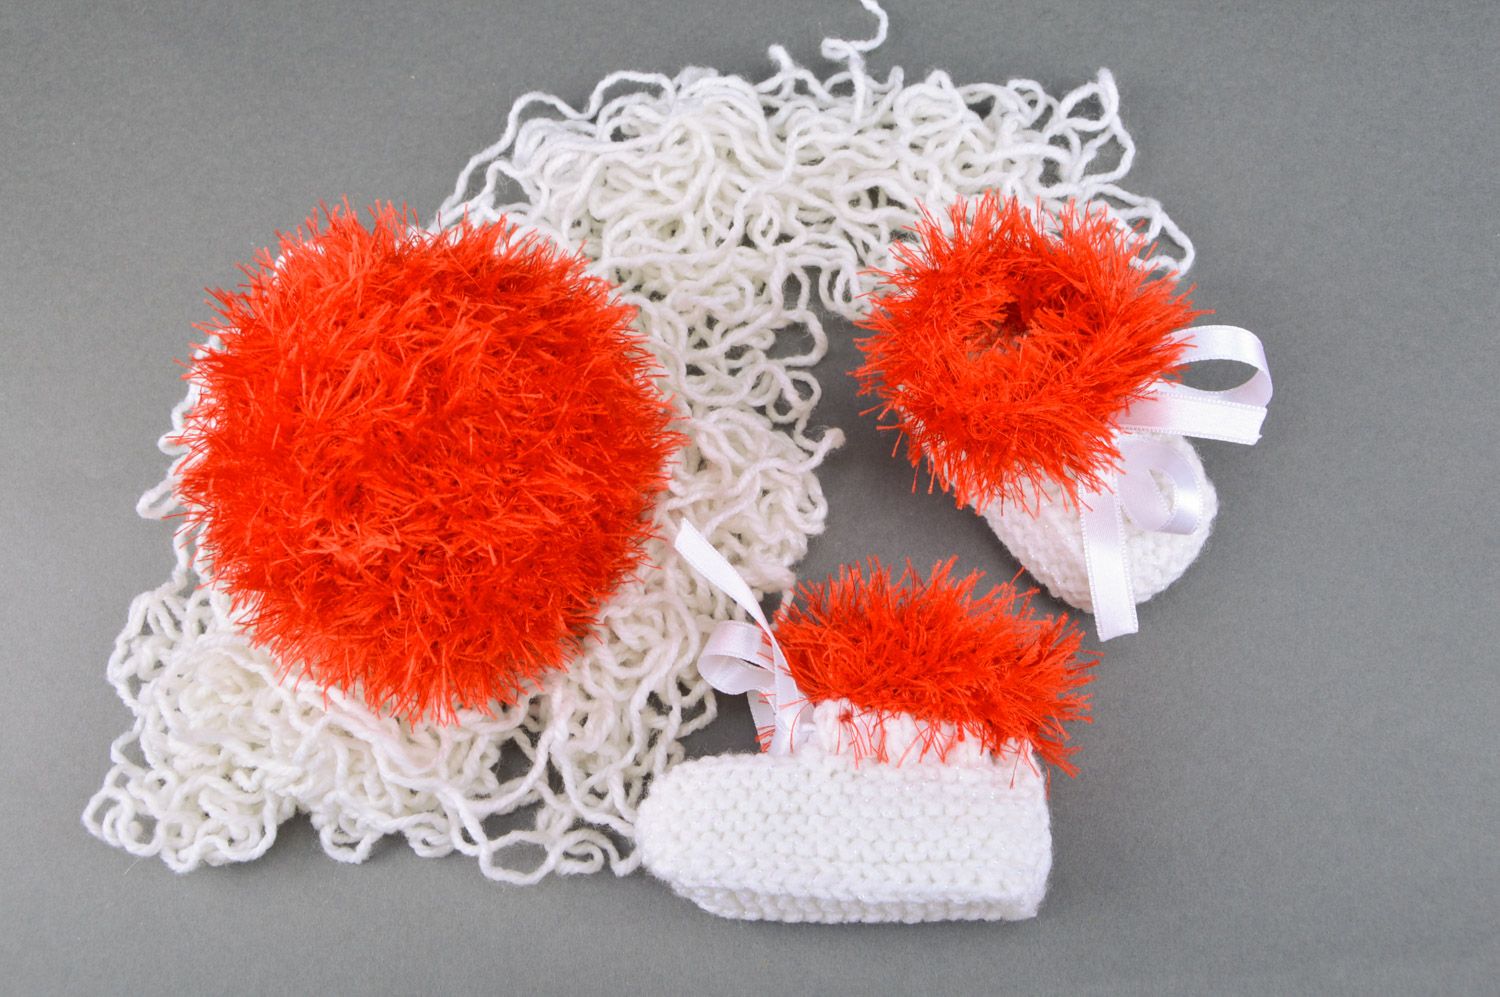 Handmade crochet soft toy ball and knitted baby booties in red and white colors photo 5